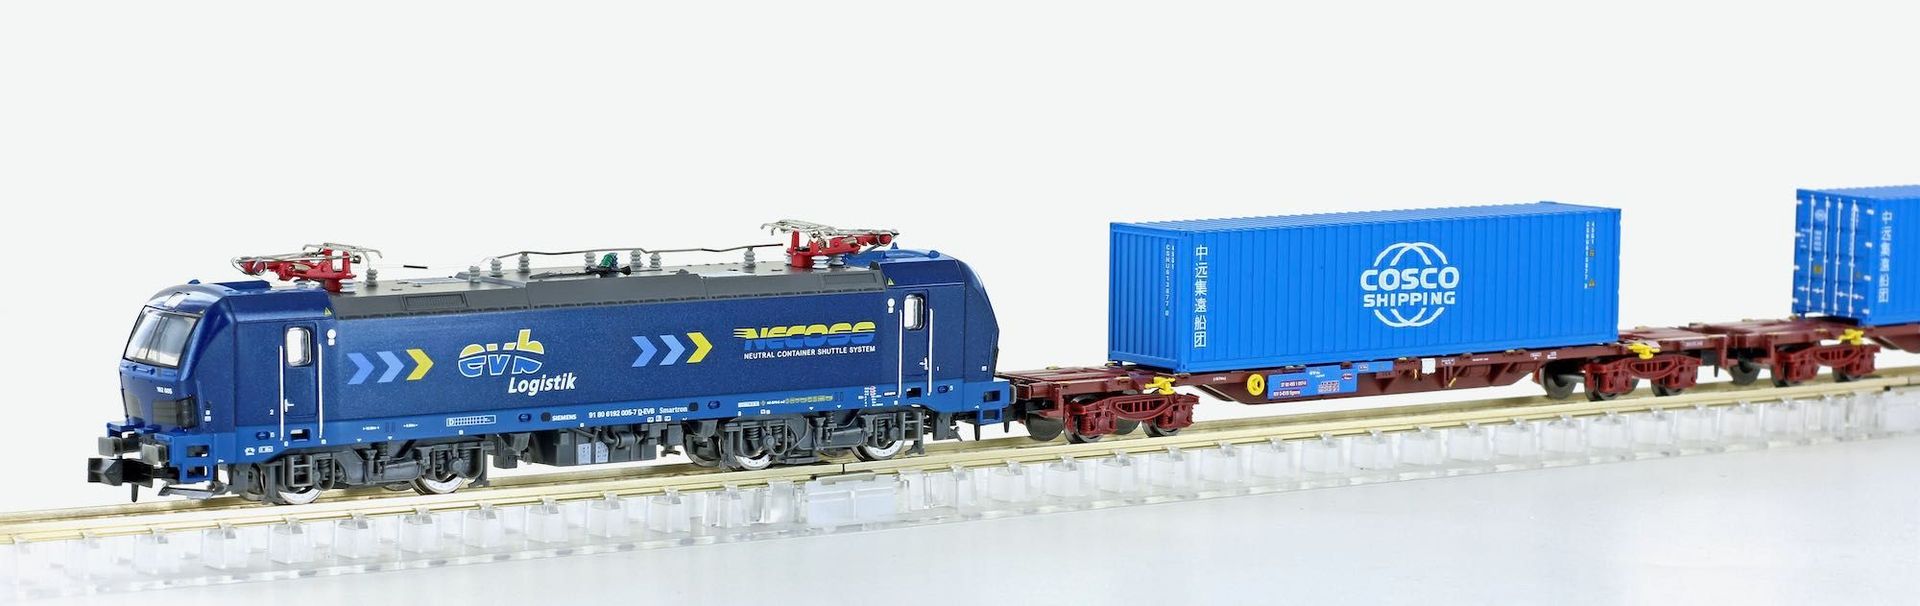 Lemke Collection 96004 - Container-Zug mit E-Lok BR 192 005 Smartron N 1:160